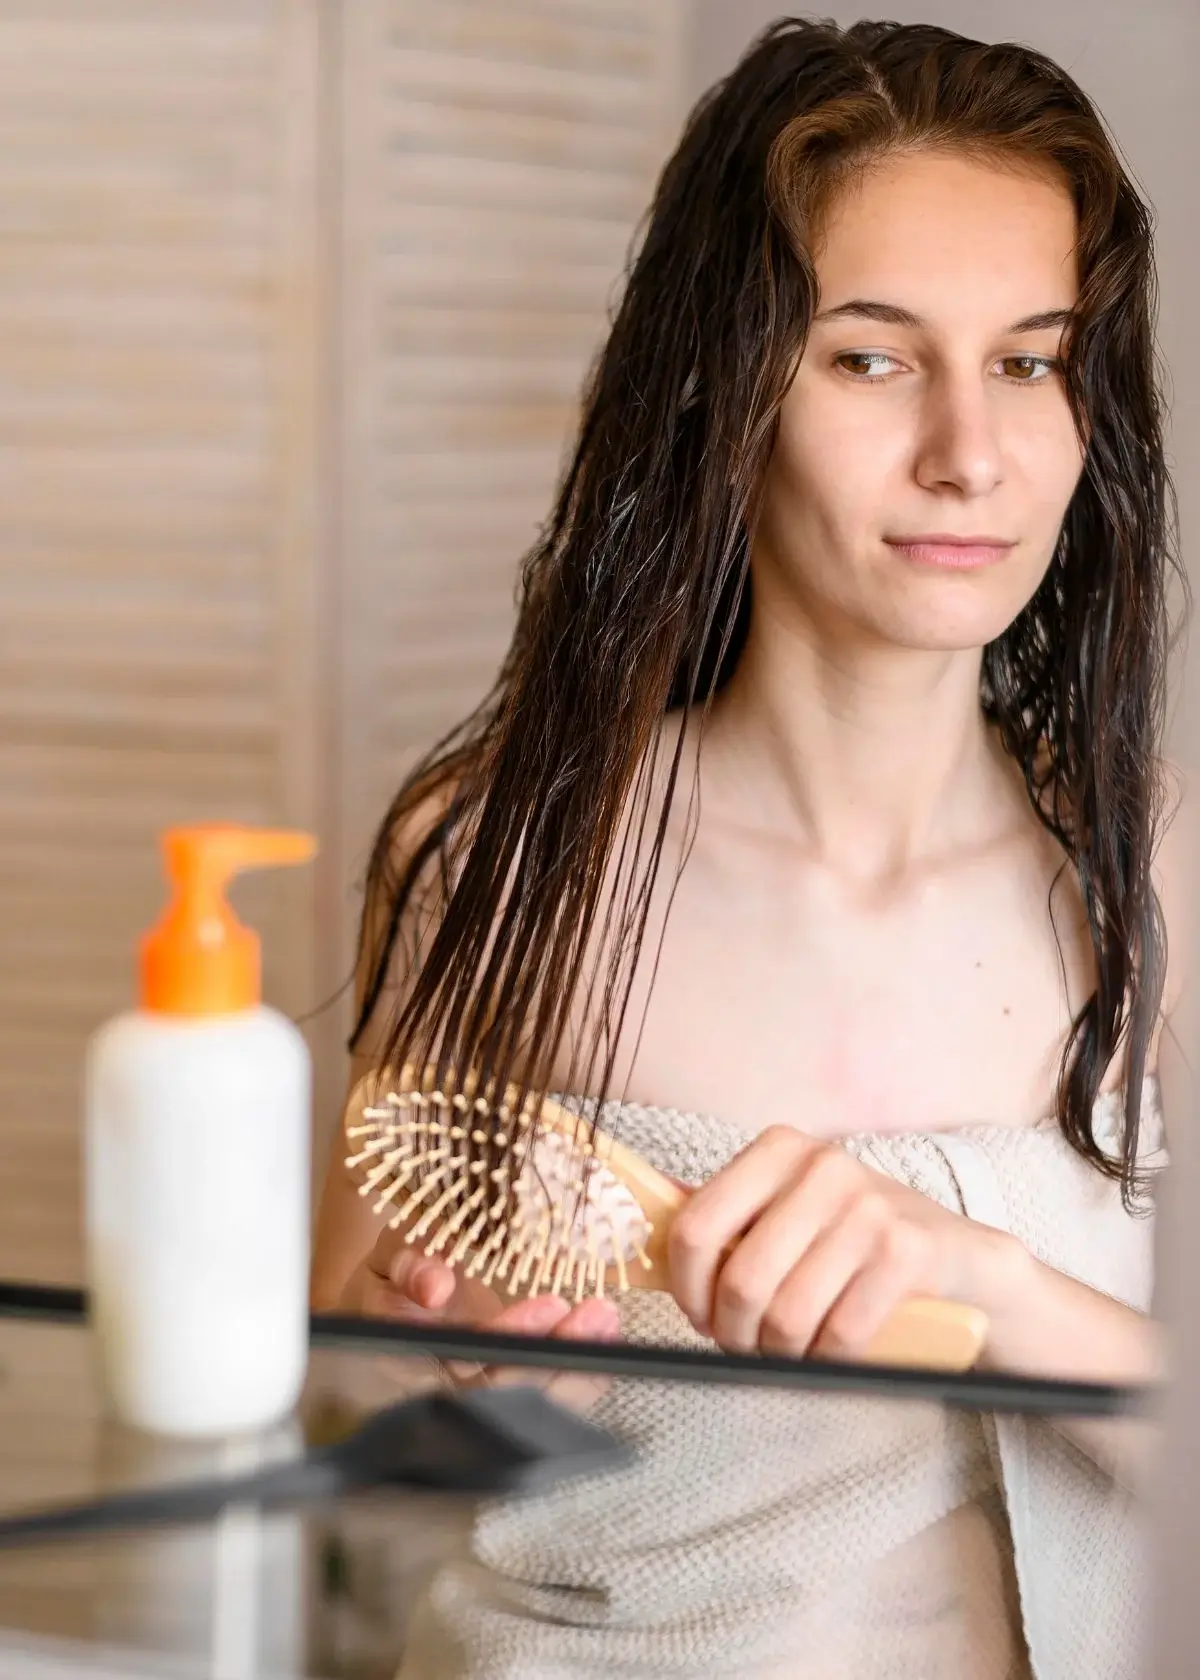 How to choose the right shampoo and conditioner for curly and frizzy hair